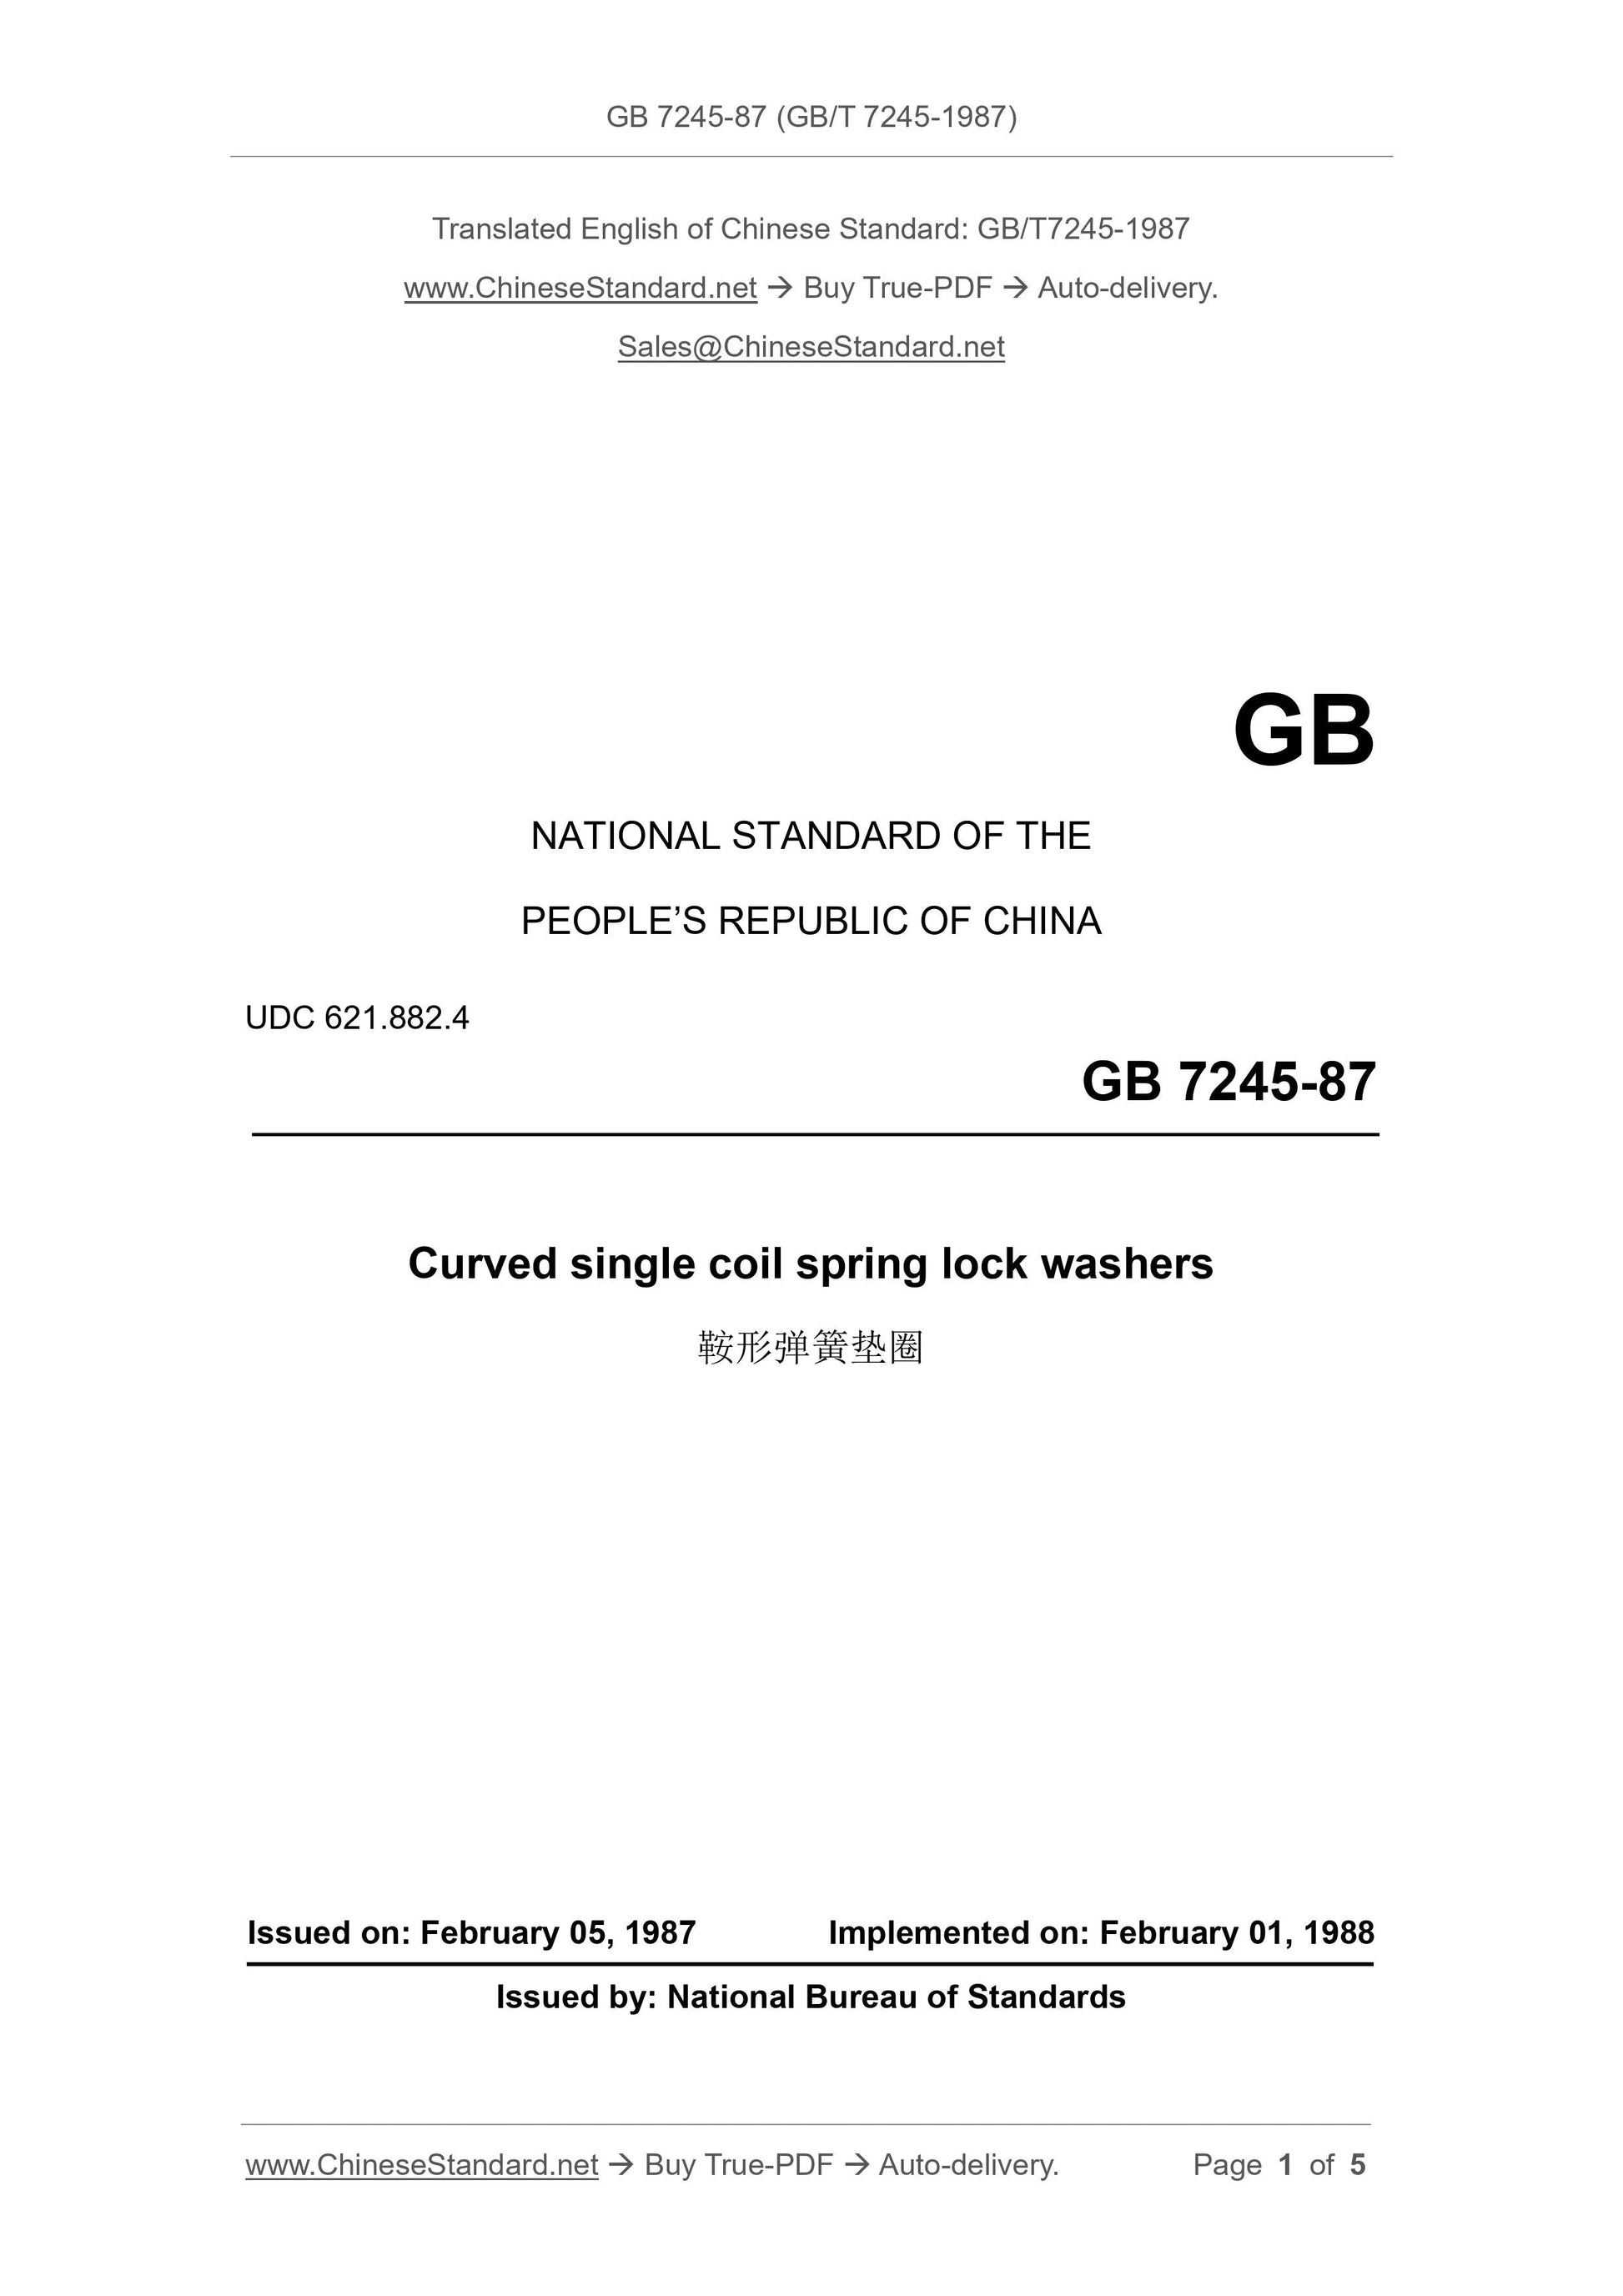 GB/T 7245-1987 Page 1